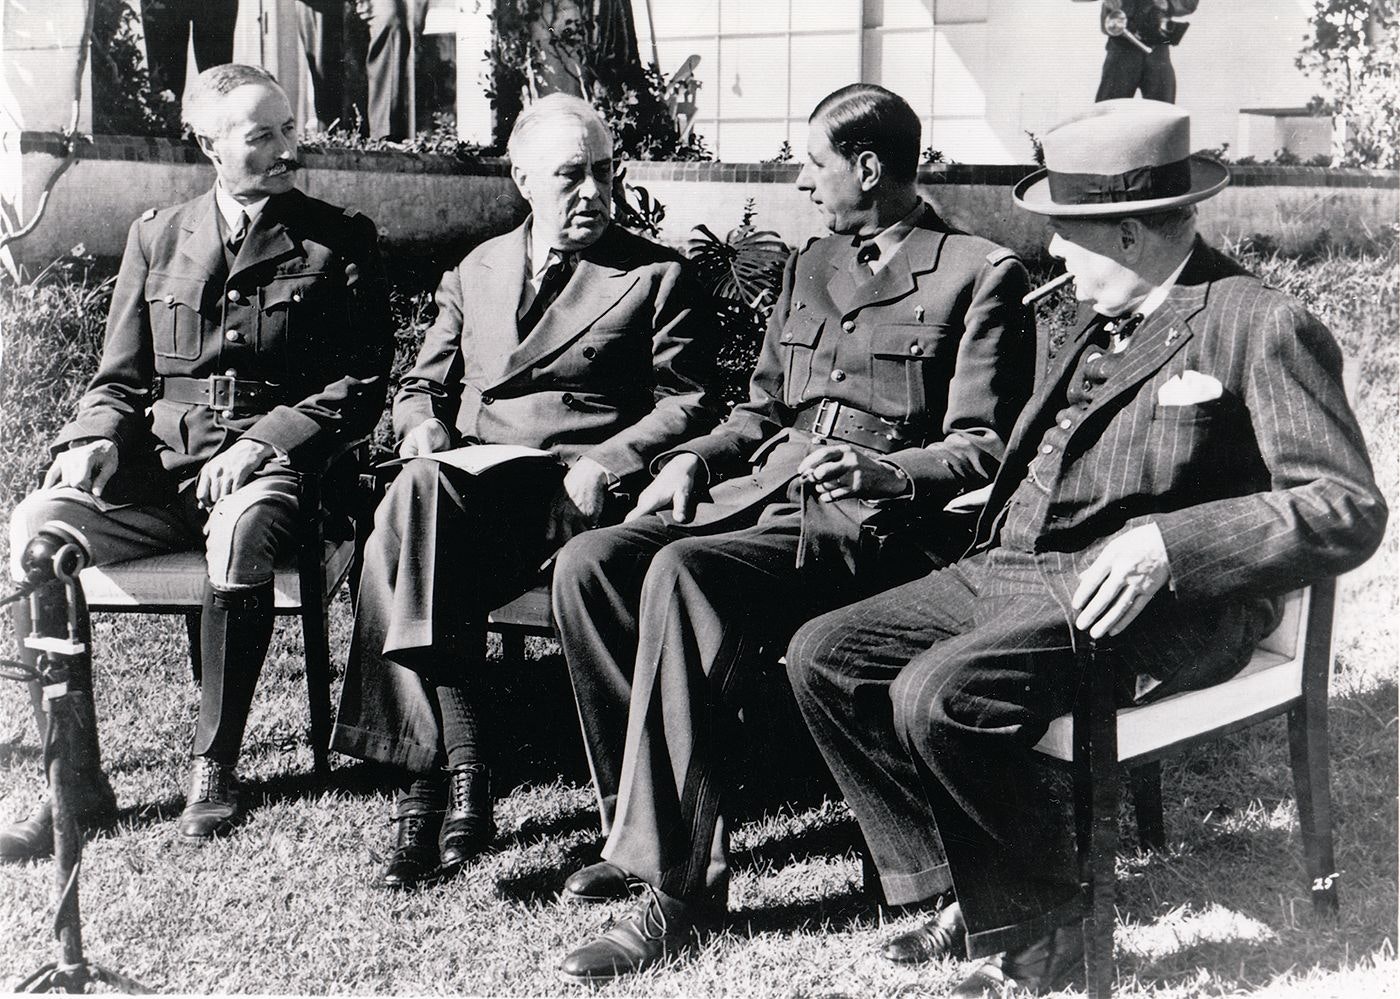 On January 14, 1943, Churchill, De Gaulle, Roosevel and Giraud meet at the secret conference in Casablanca.